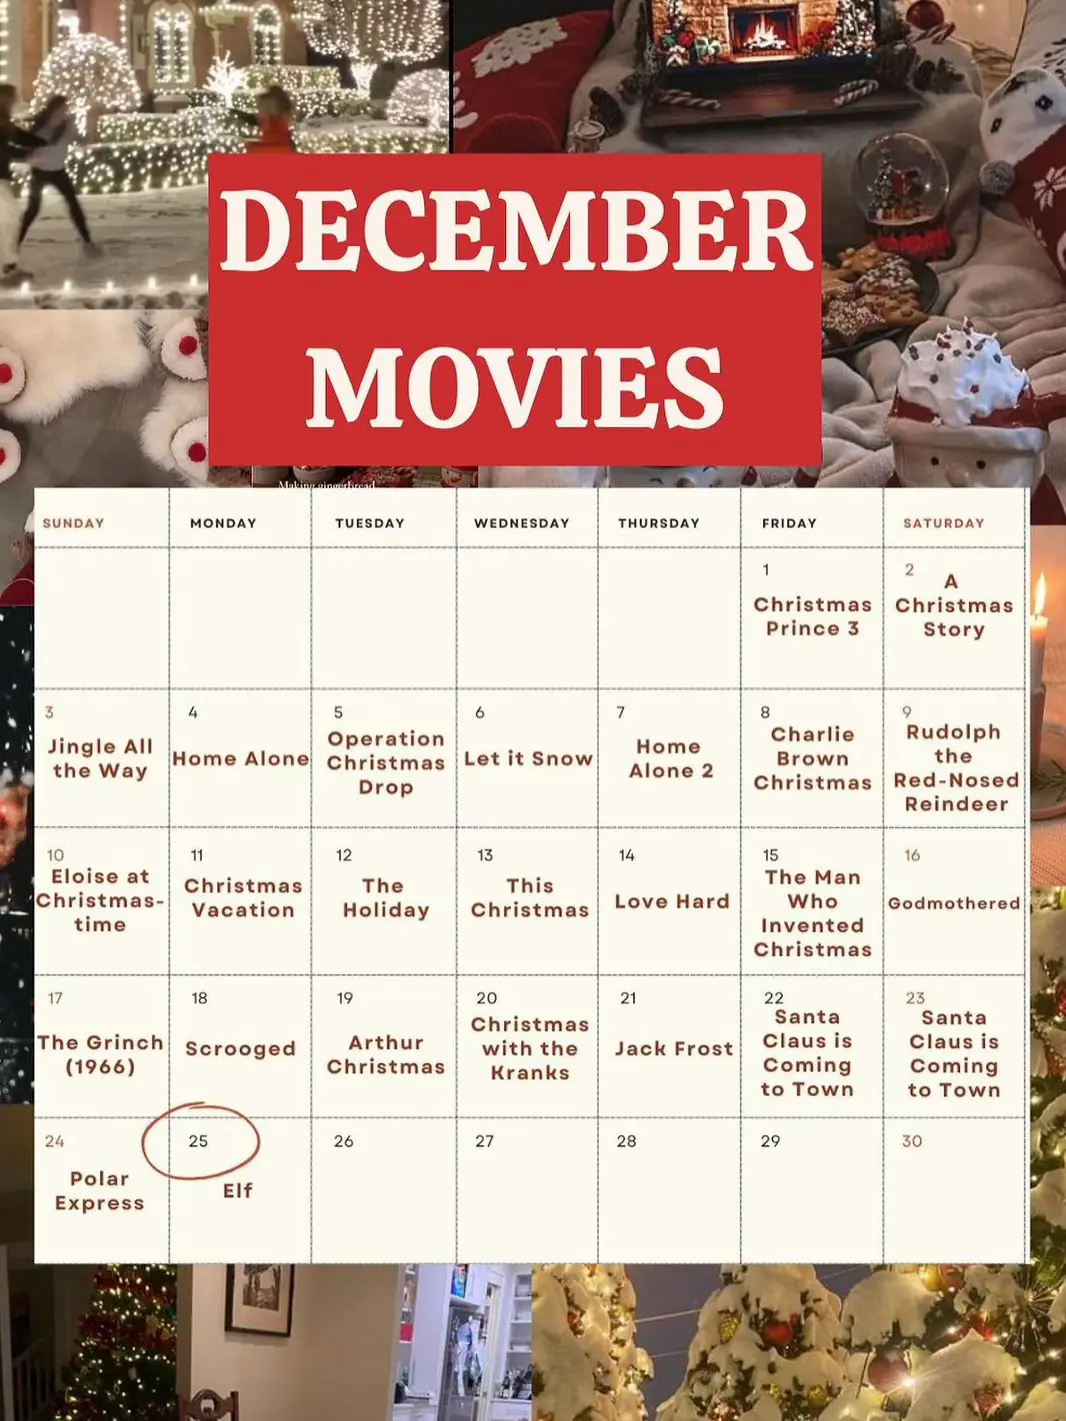 How to watch all 172 new Christmas movies in December